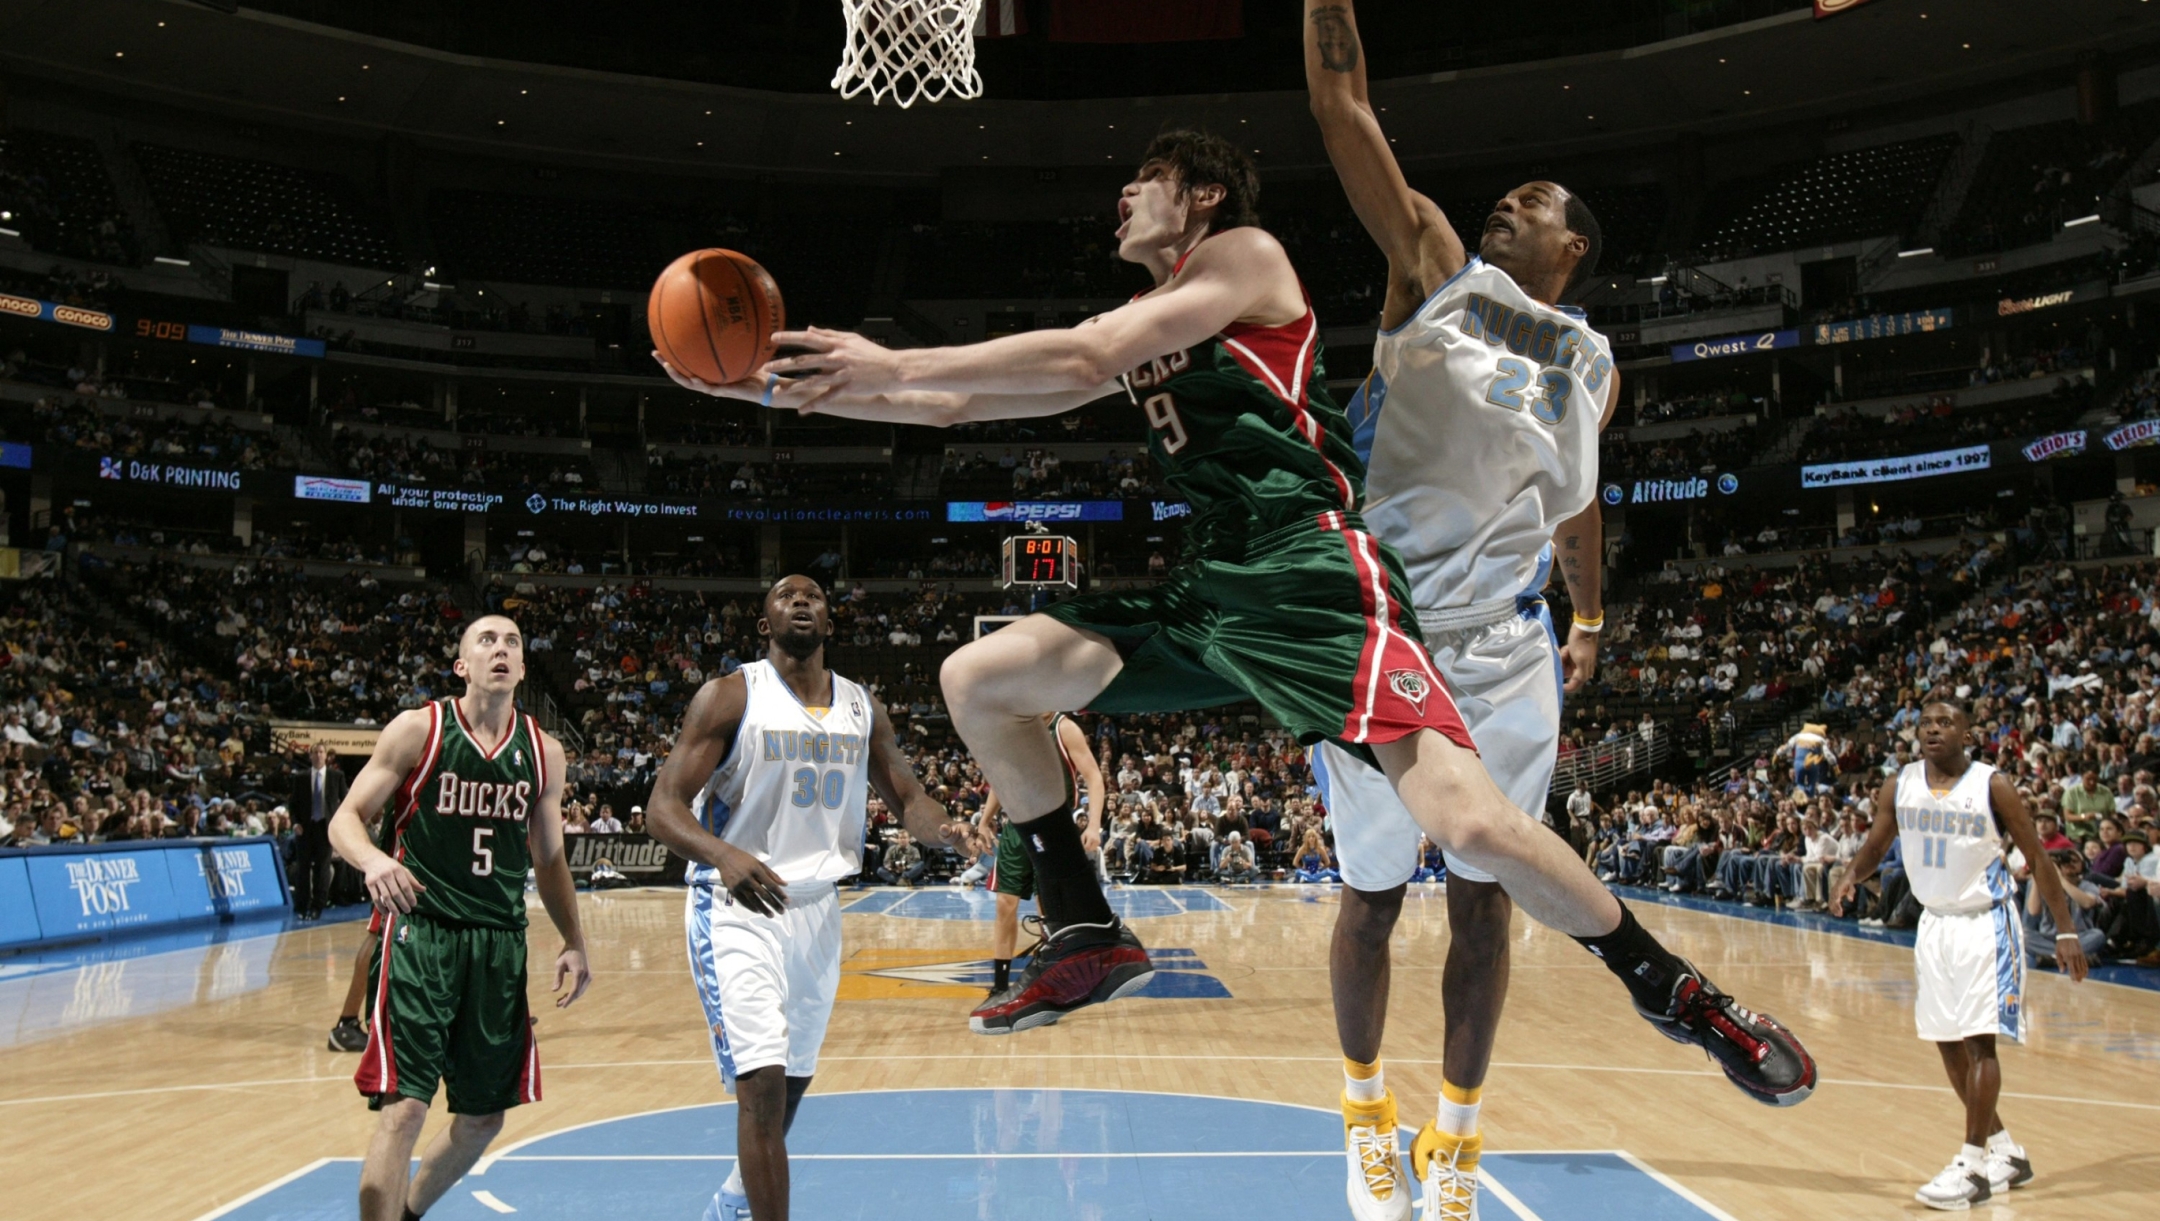 Ersan Ilyasova #19 of the Milwaukee Bucks shoots against Marcus Camby #23 of the Denver Nuggets 08 January 2006 at the Pepsi Center in Denver, Colorado.  Nathaniel S. Butler/NBAE via Getty Images/AFP  =FOR NEWSPAPERS, INTERNET, TELCOS AND TELEVISION USE ONLY= (Photo by Nathaniel S. Butler / NBAE / Getty Images via AFP)